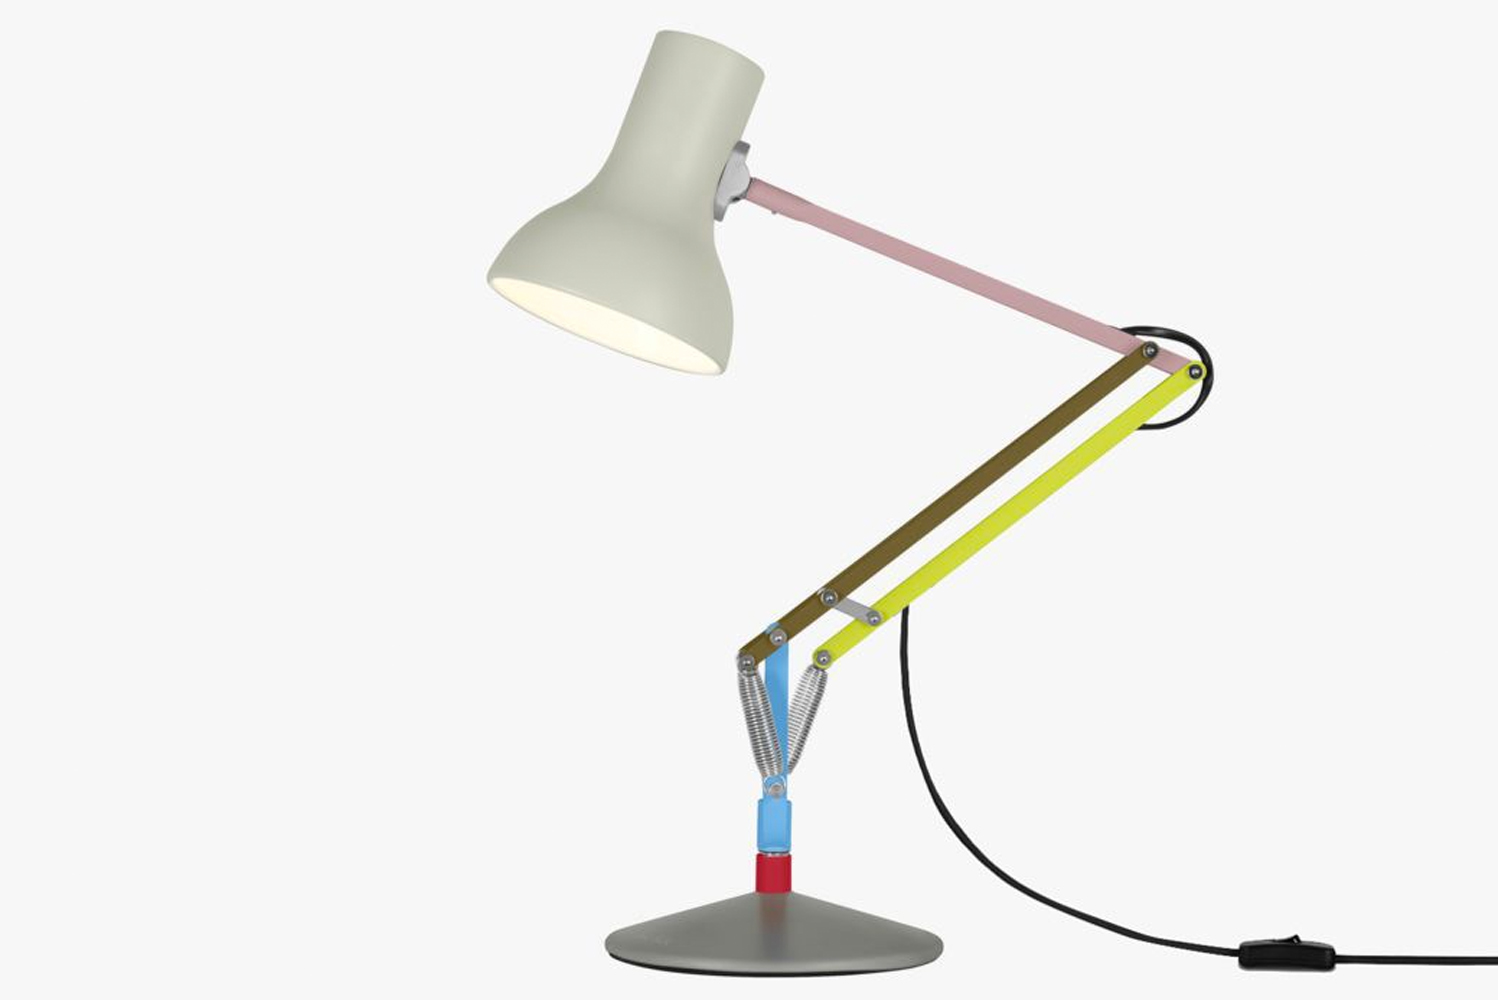 Anglepoise teamed up with British fashion designer Paul Smith to re-interpret the Anglepoise Type 75 range of lights